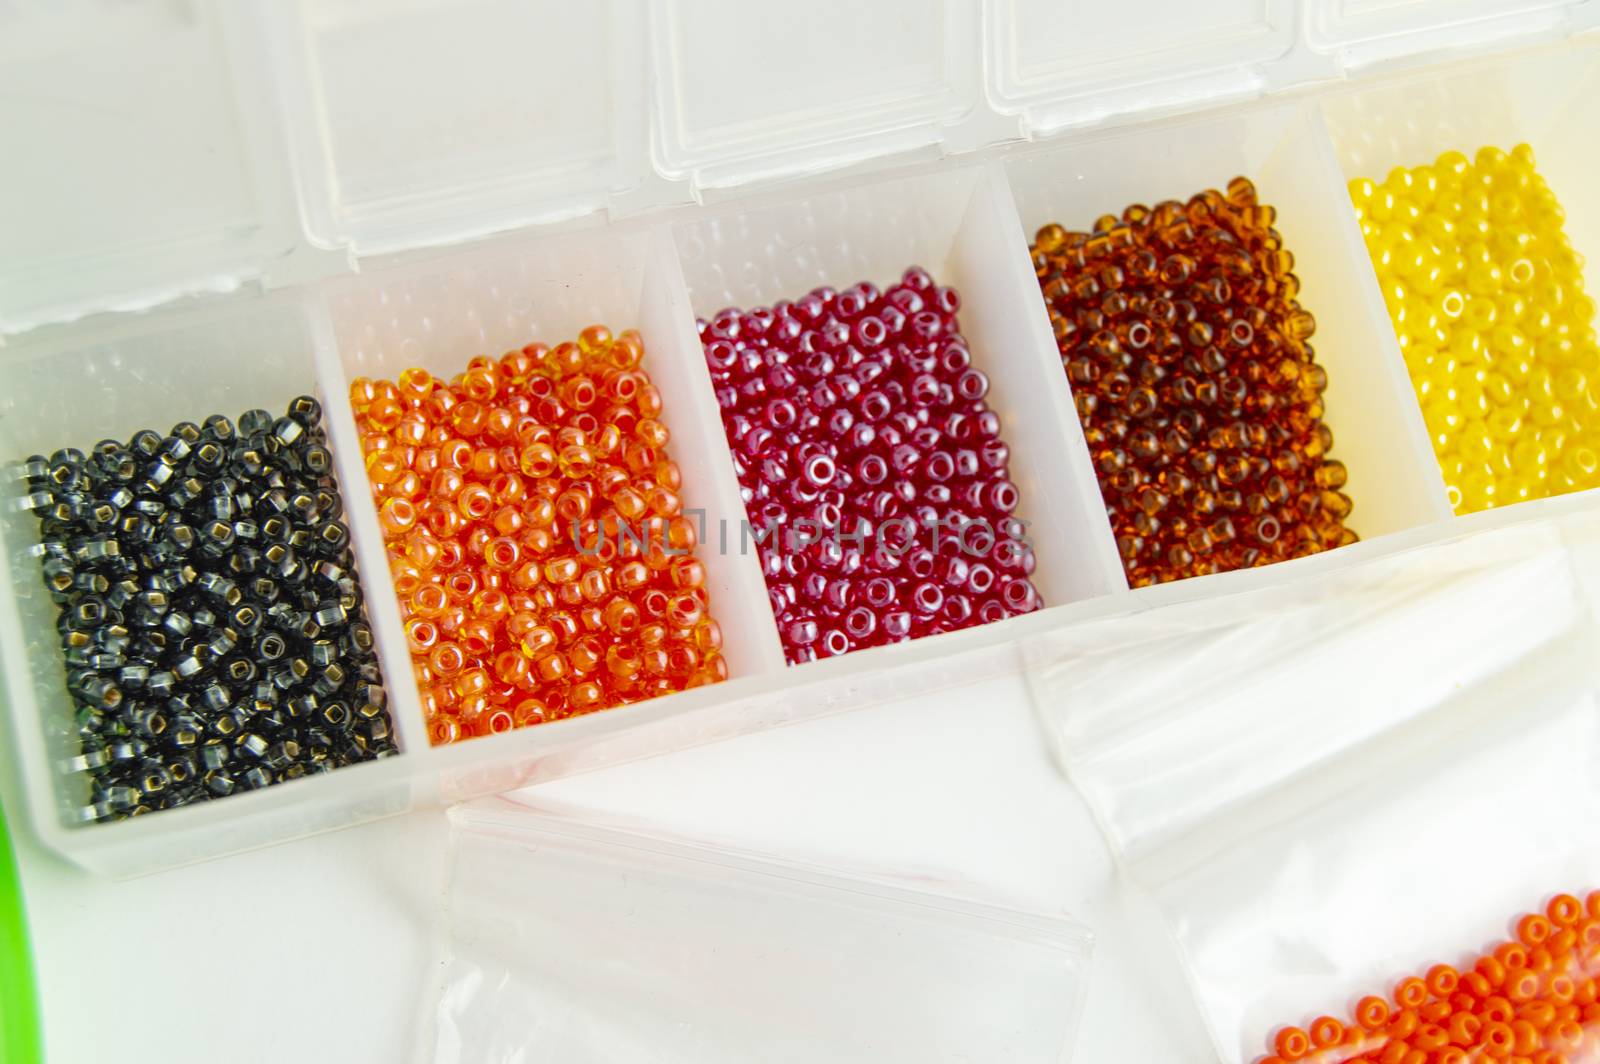 Fletley, plastic box with colorful beads for creativity and hobby, Bright sparkling beads on white background.